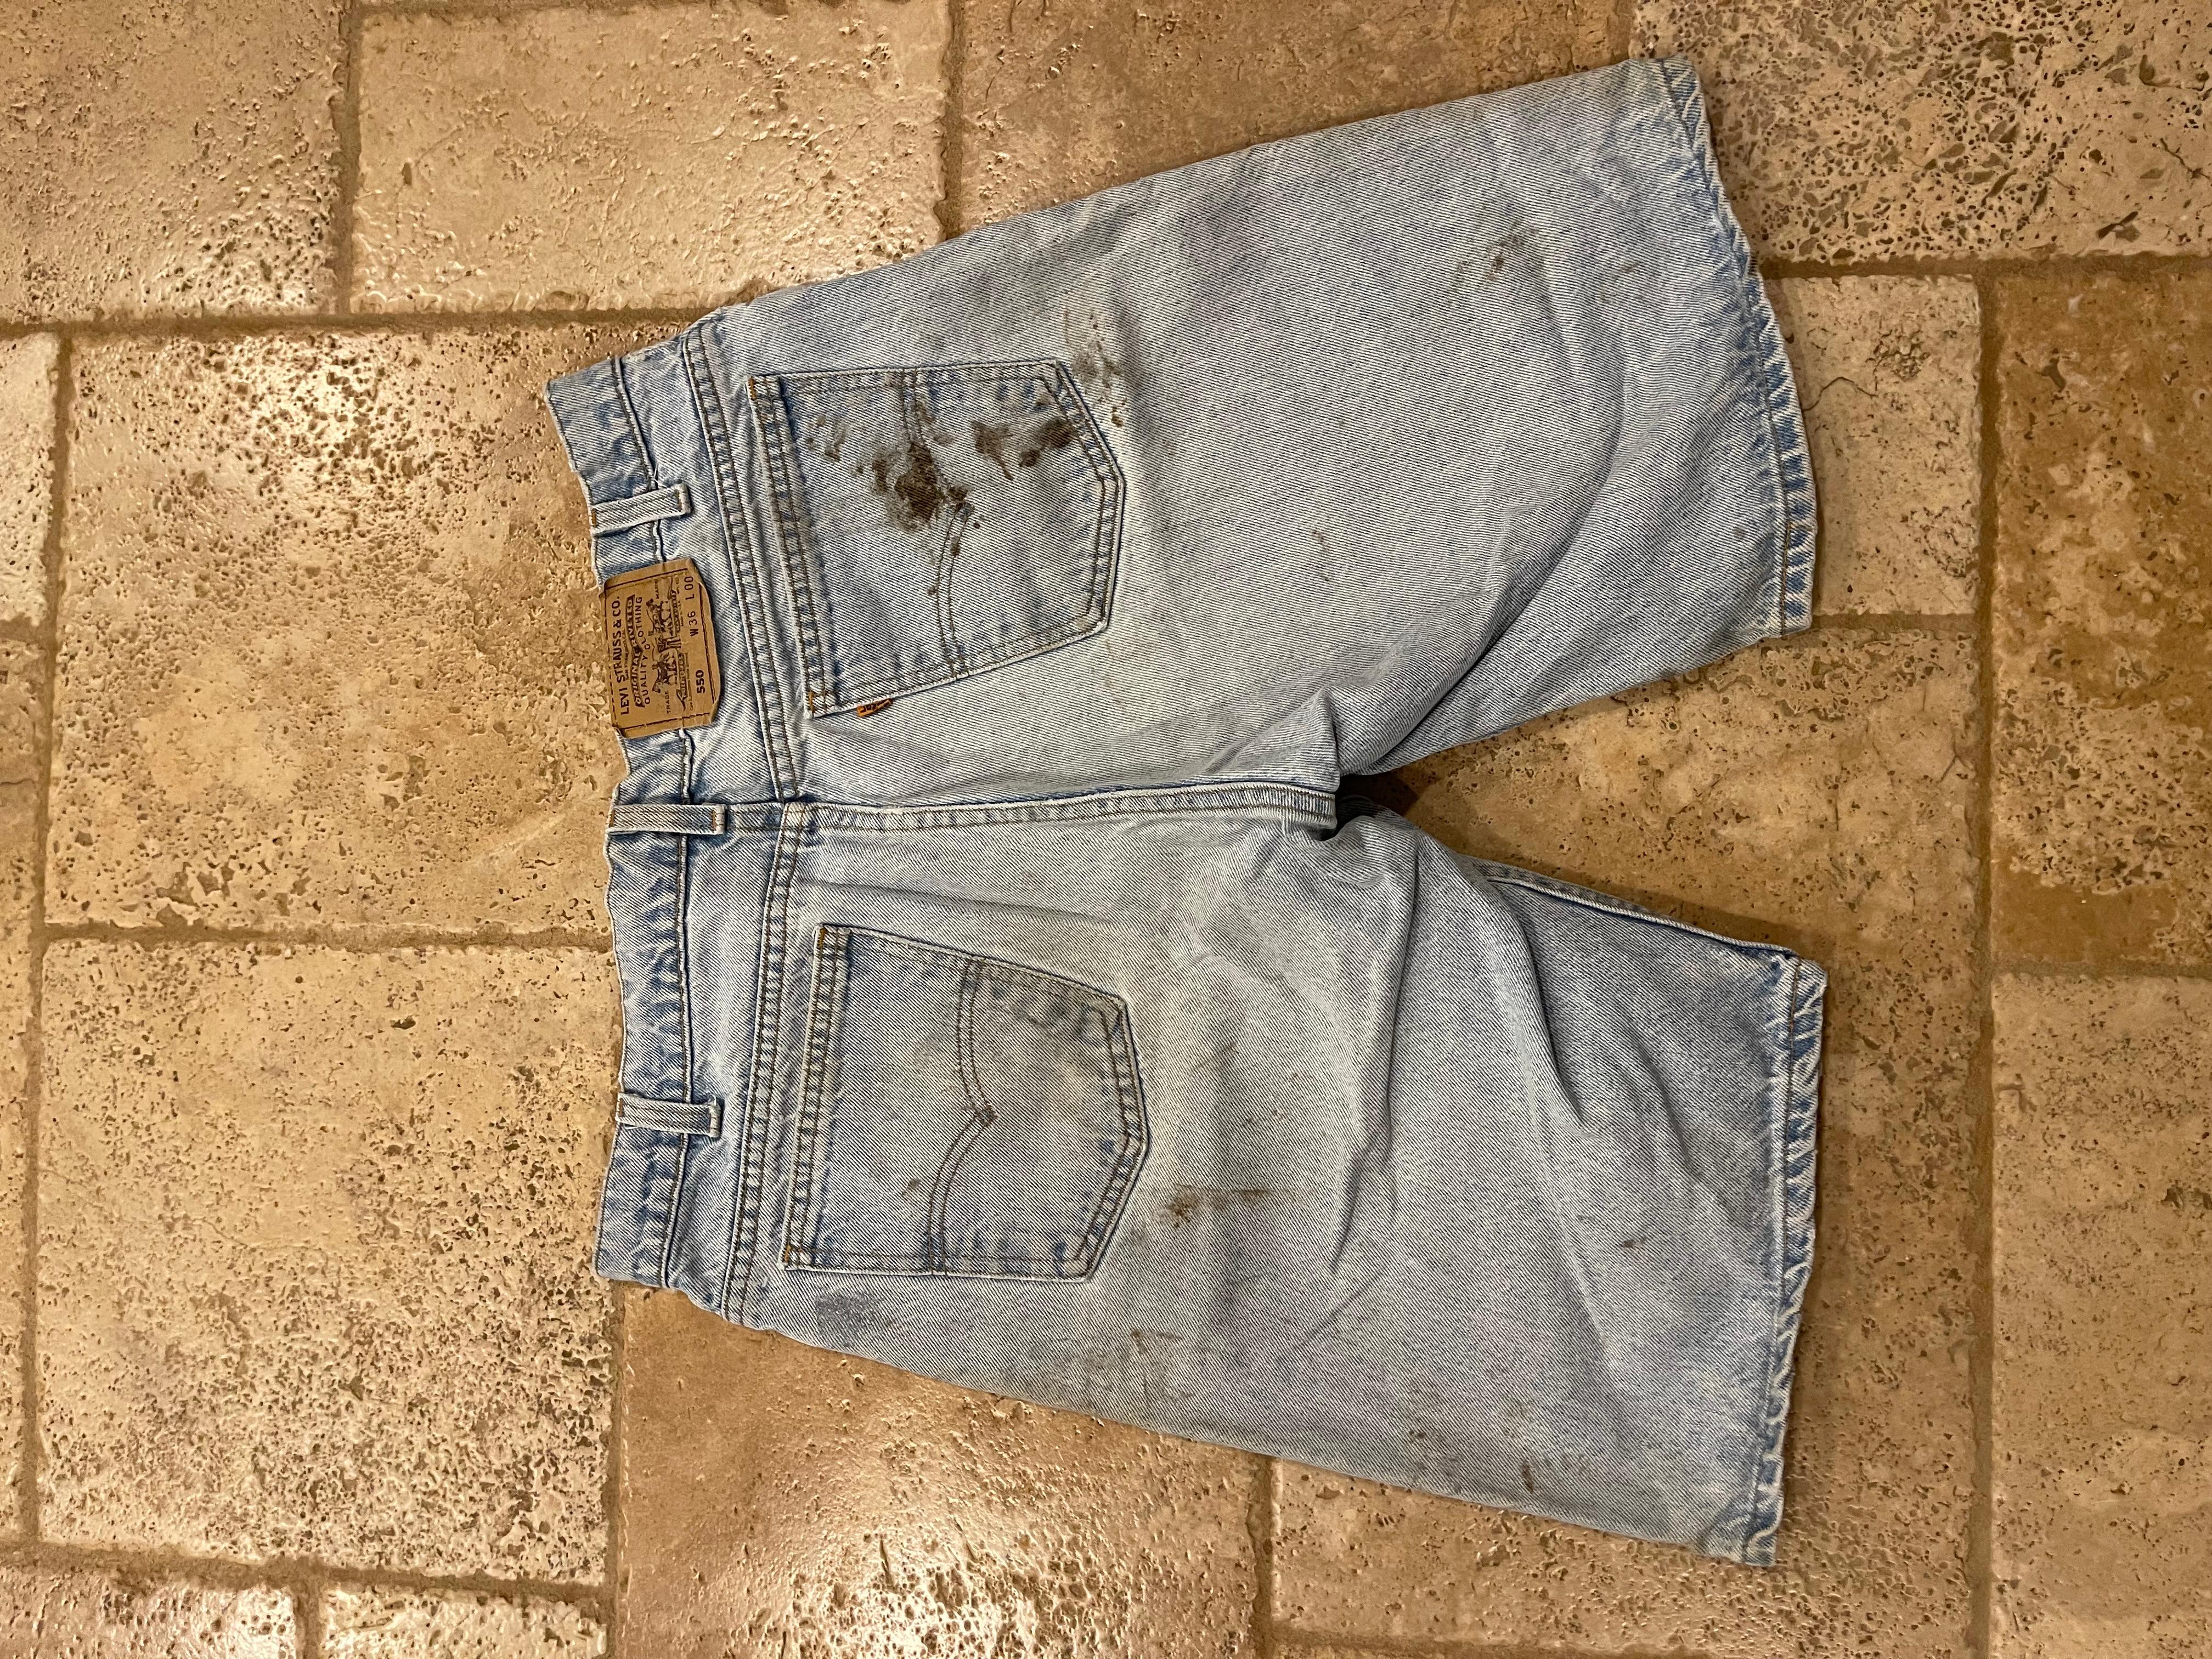 Vintage Levi’s 550 Denim Shorts
Size 36 (fits more like a 34; see measurements)
Vintage condition (do not expect it to look brand new; view all detailed pics)

Paint, Oil and dirt stains on it. Can look amazing when worn correctly.
From the early